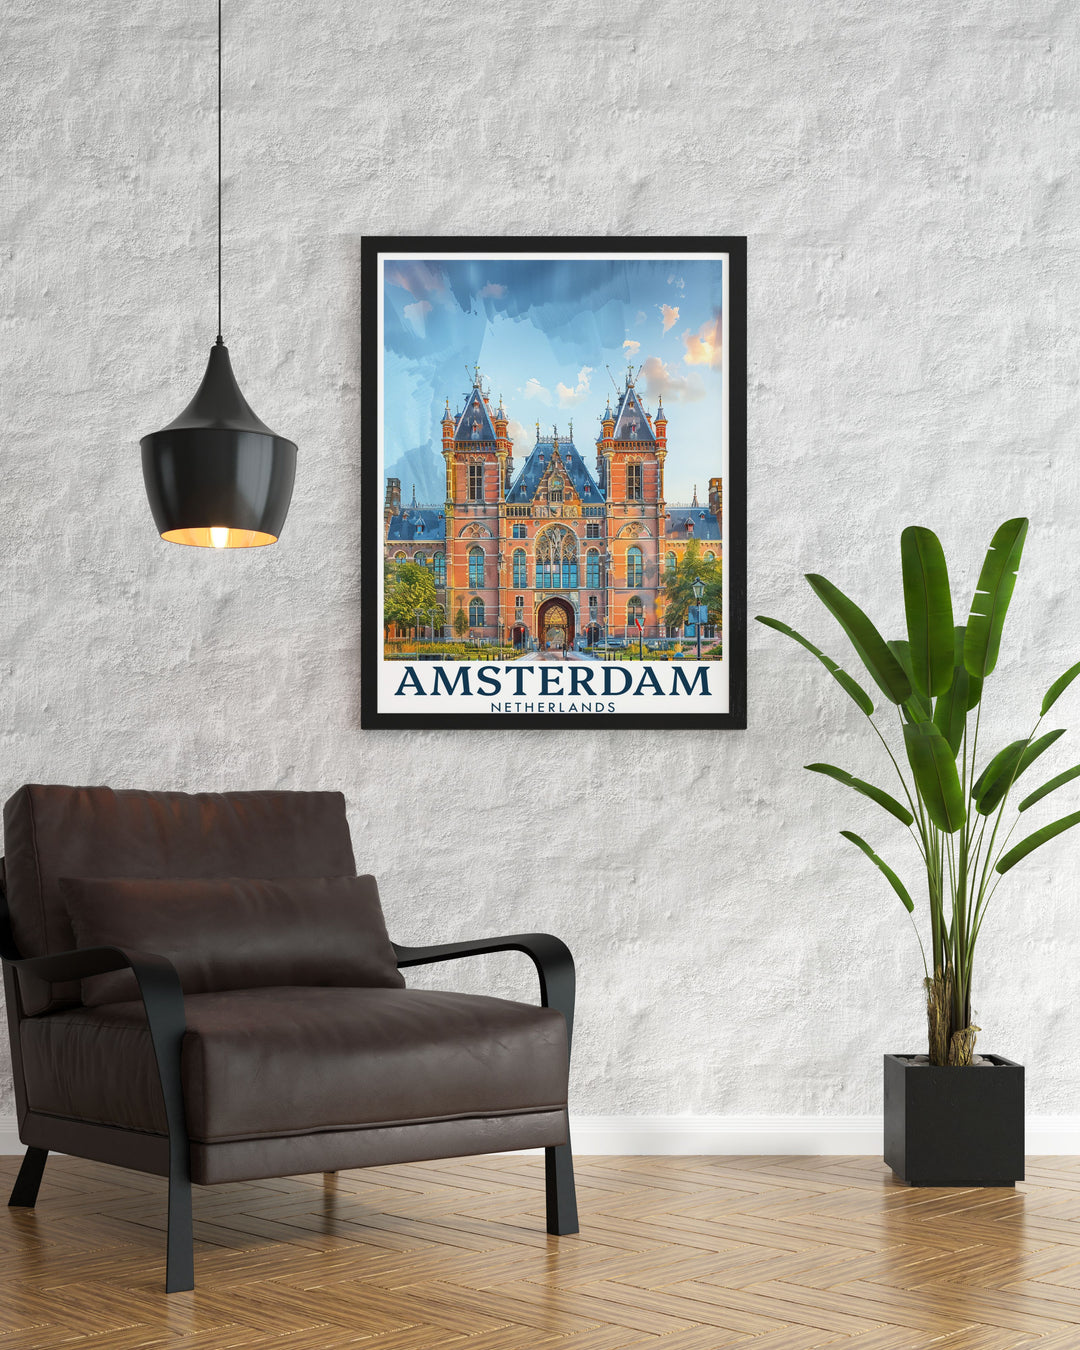 Elegant Amsterdam photo of the Rijksmuseum. A perfect addition to your Amsterdam decor collection. This Amsterdam art print showcases the citys historical landmarks and vibrant culture. Ideal for those who love city prints and fine line art.